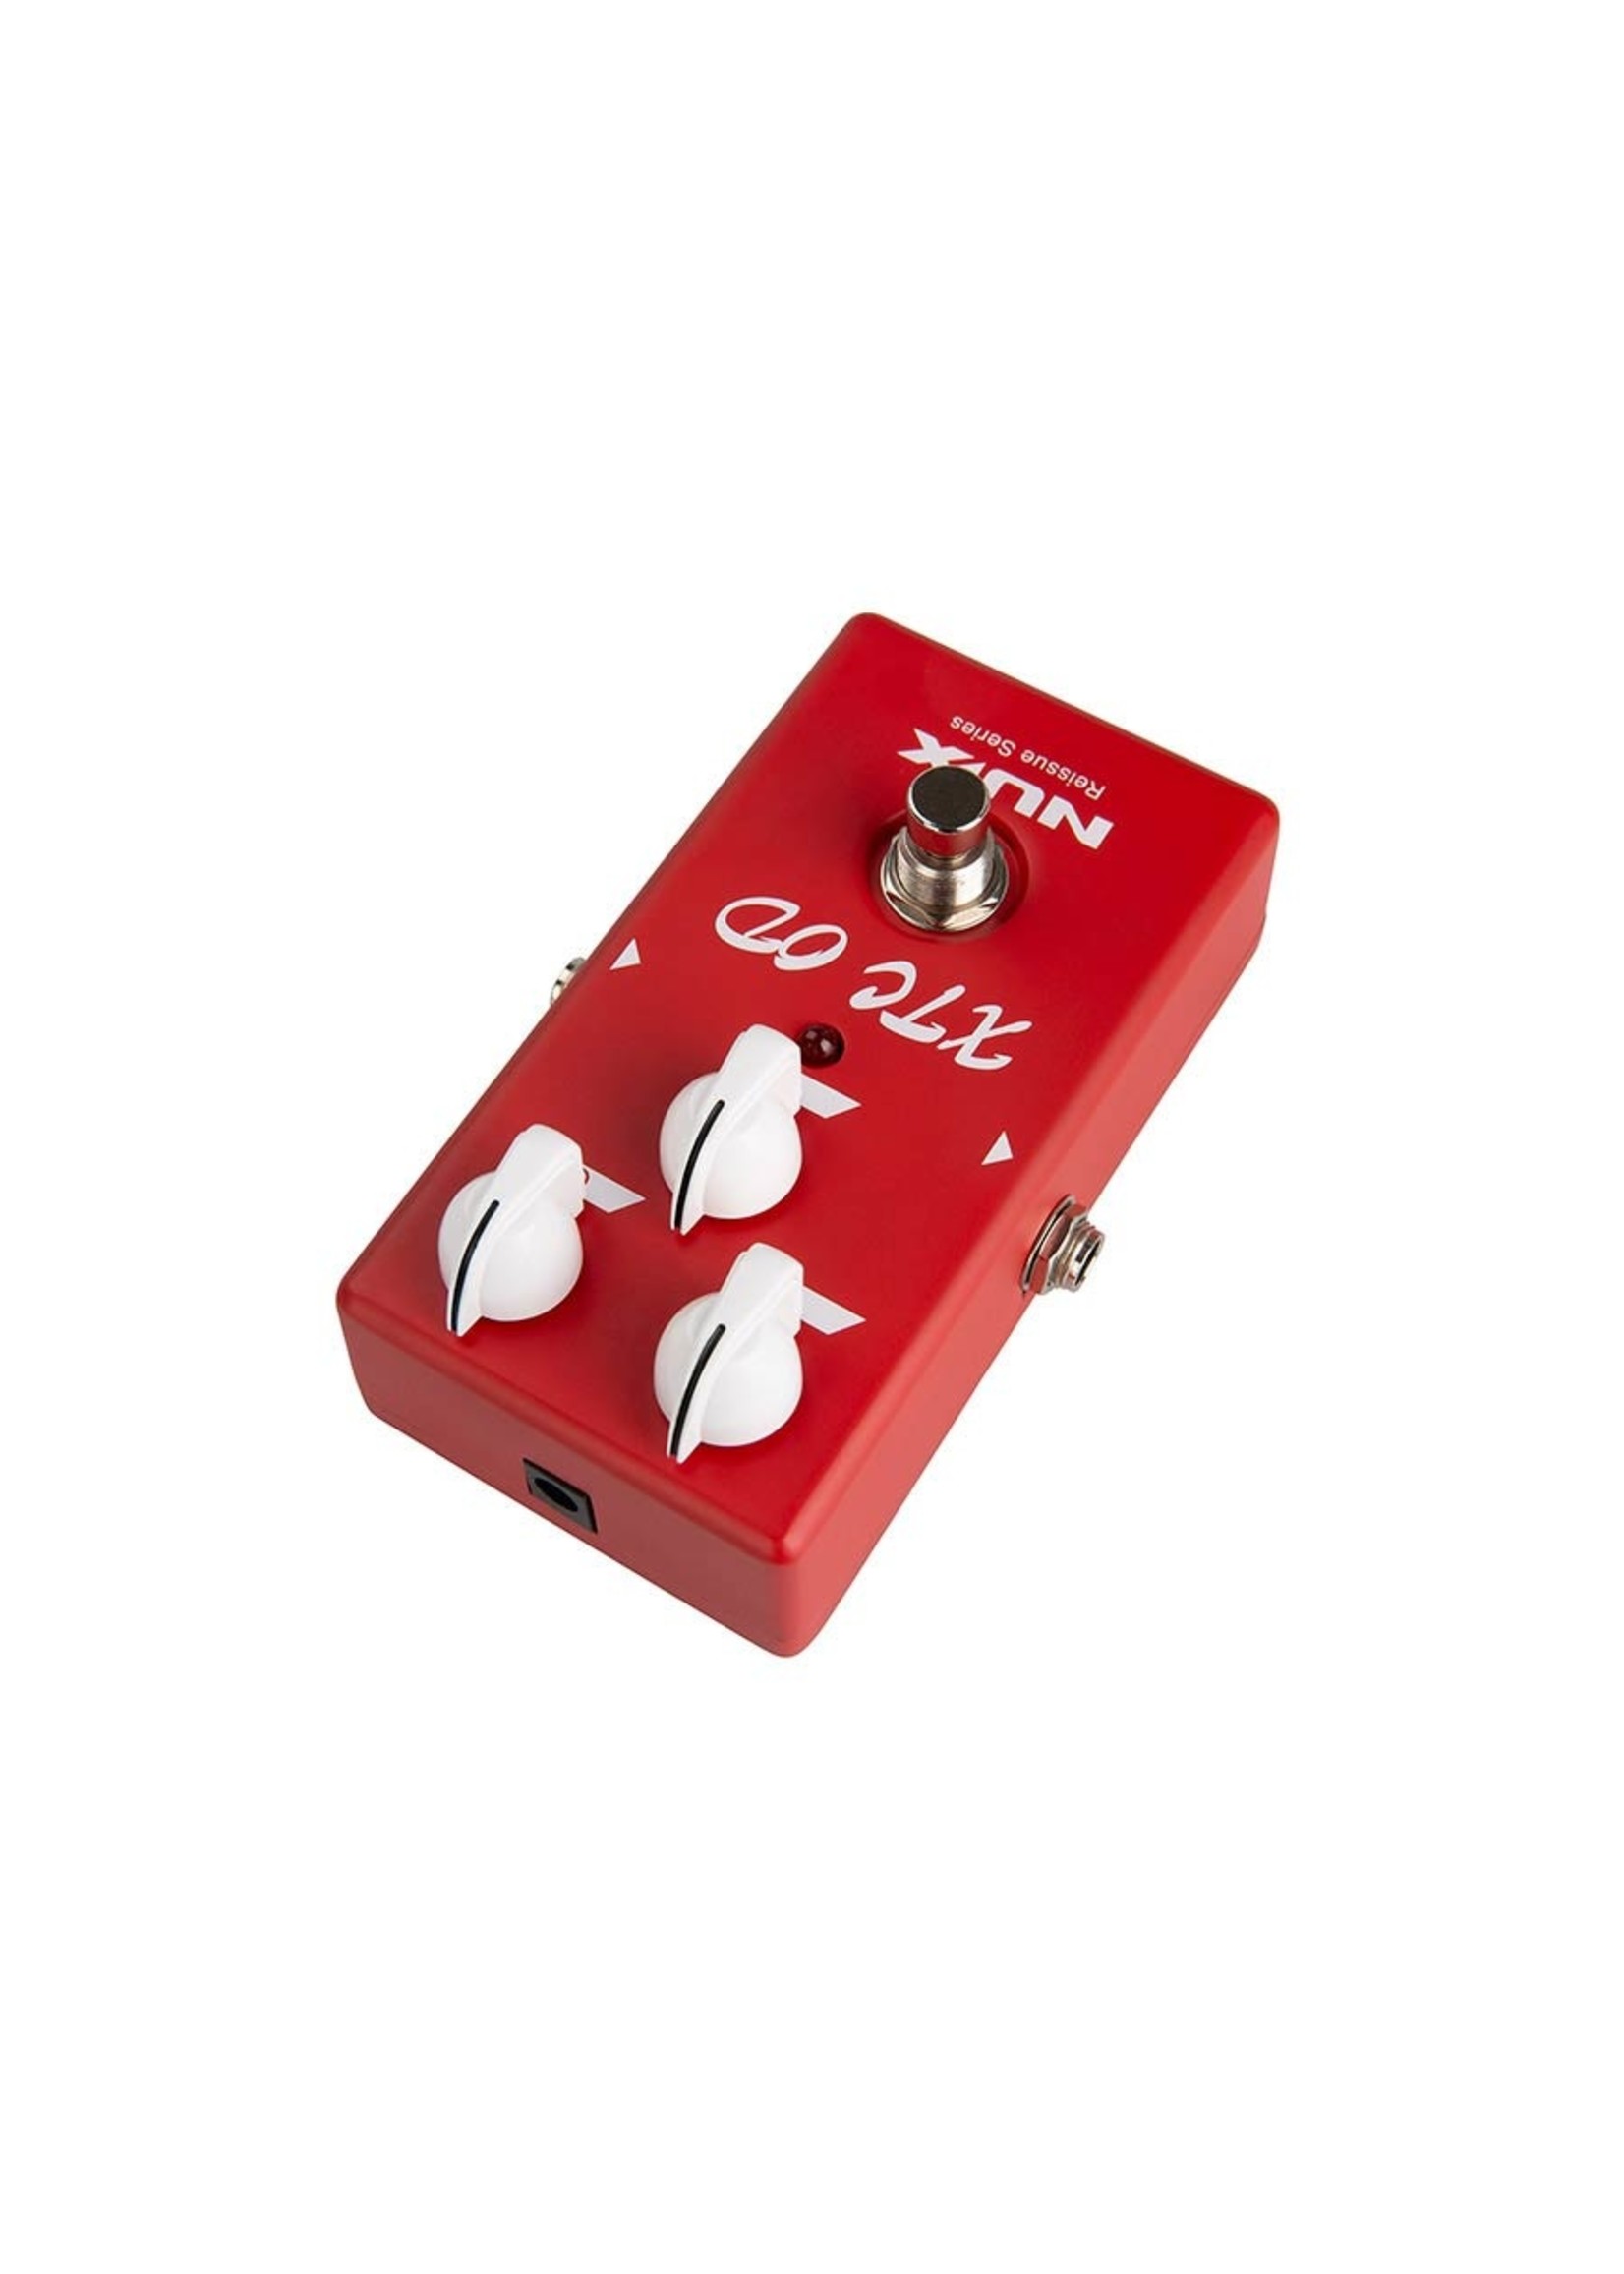 NUX NUX XTC OD Overdrive